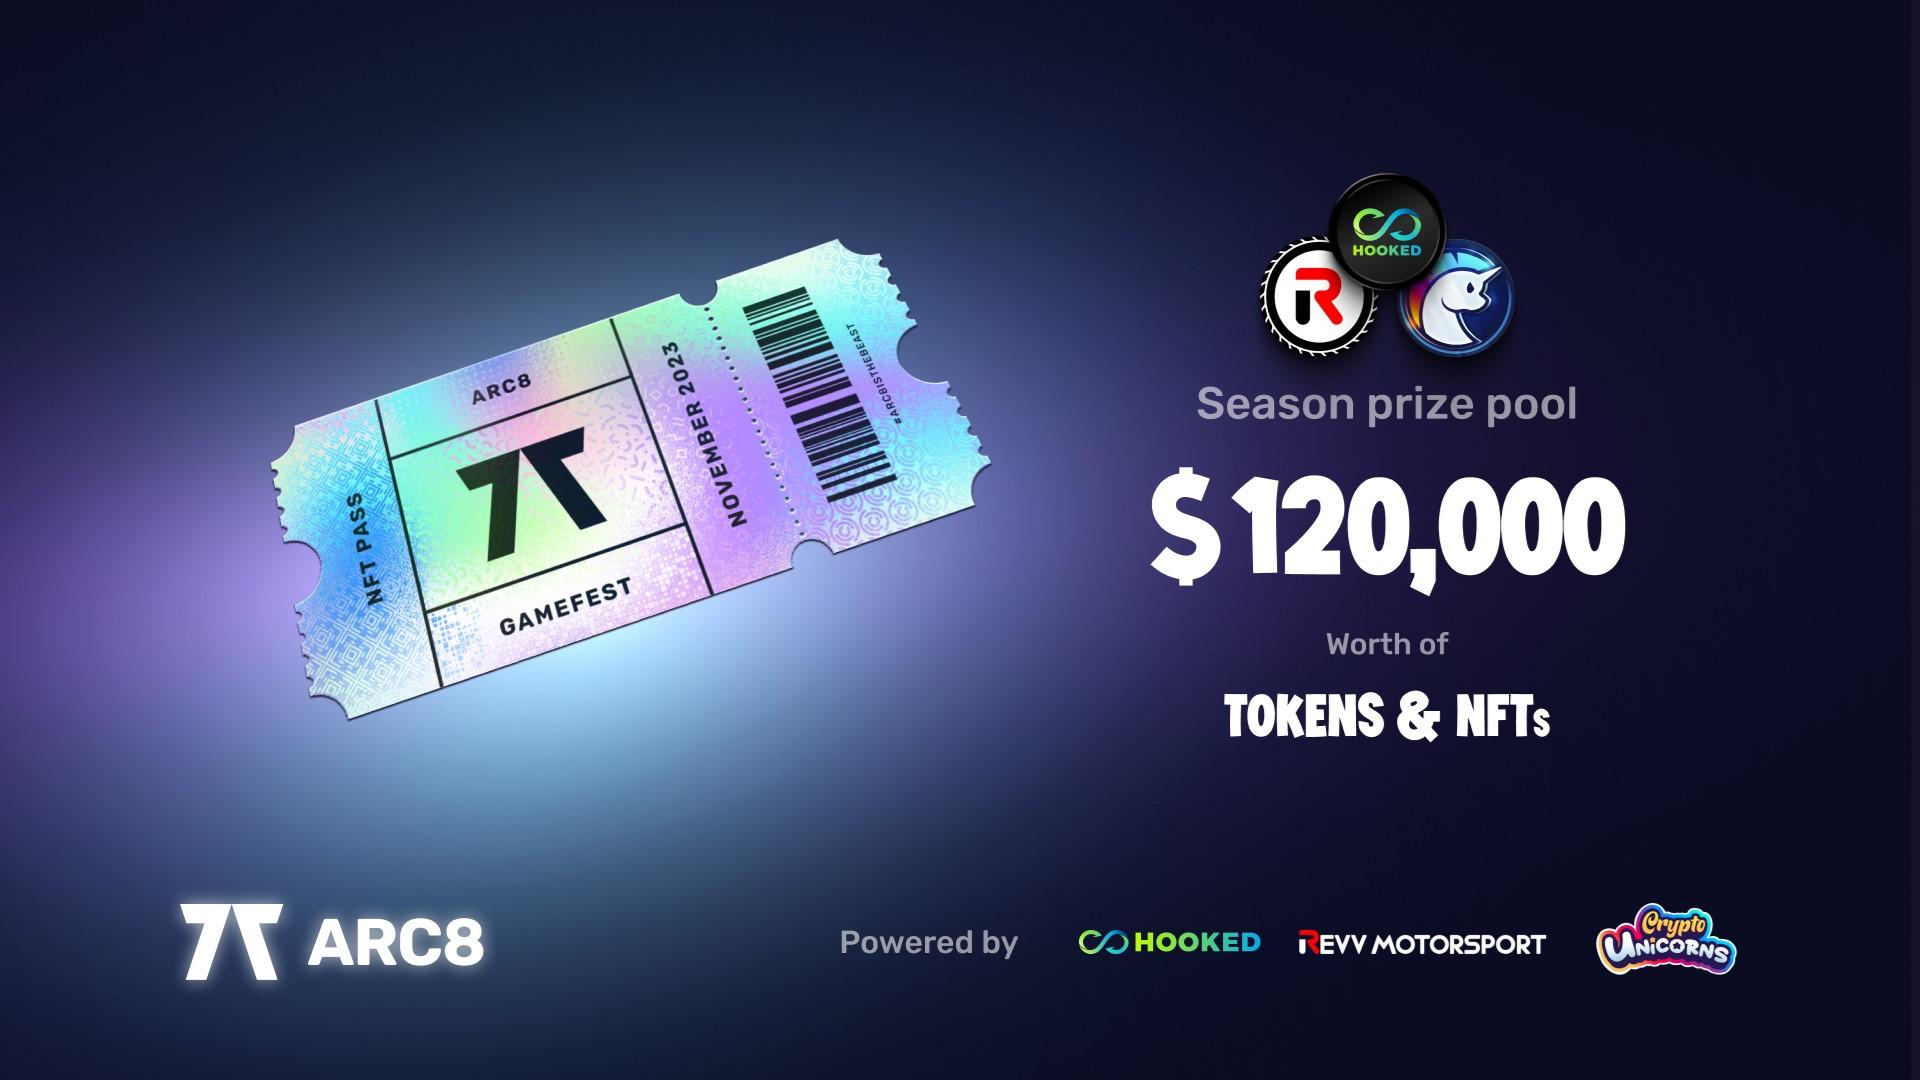 Arc8 Unleashes GameFest Extravaganza with $120,000 Prize Pool and Exclusive NFTs